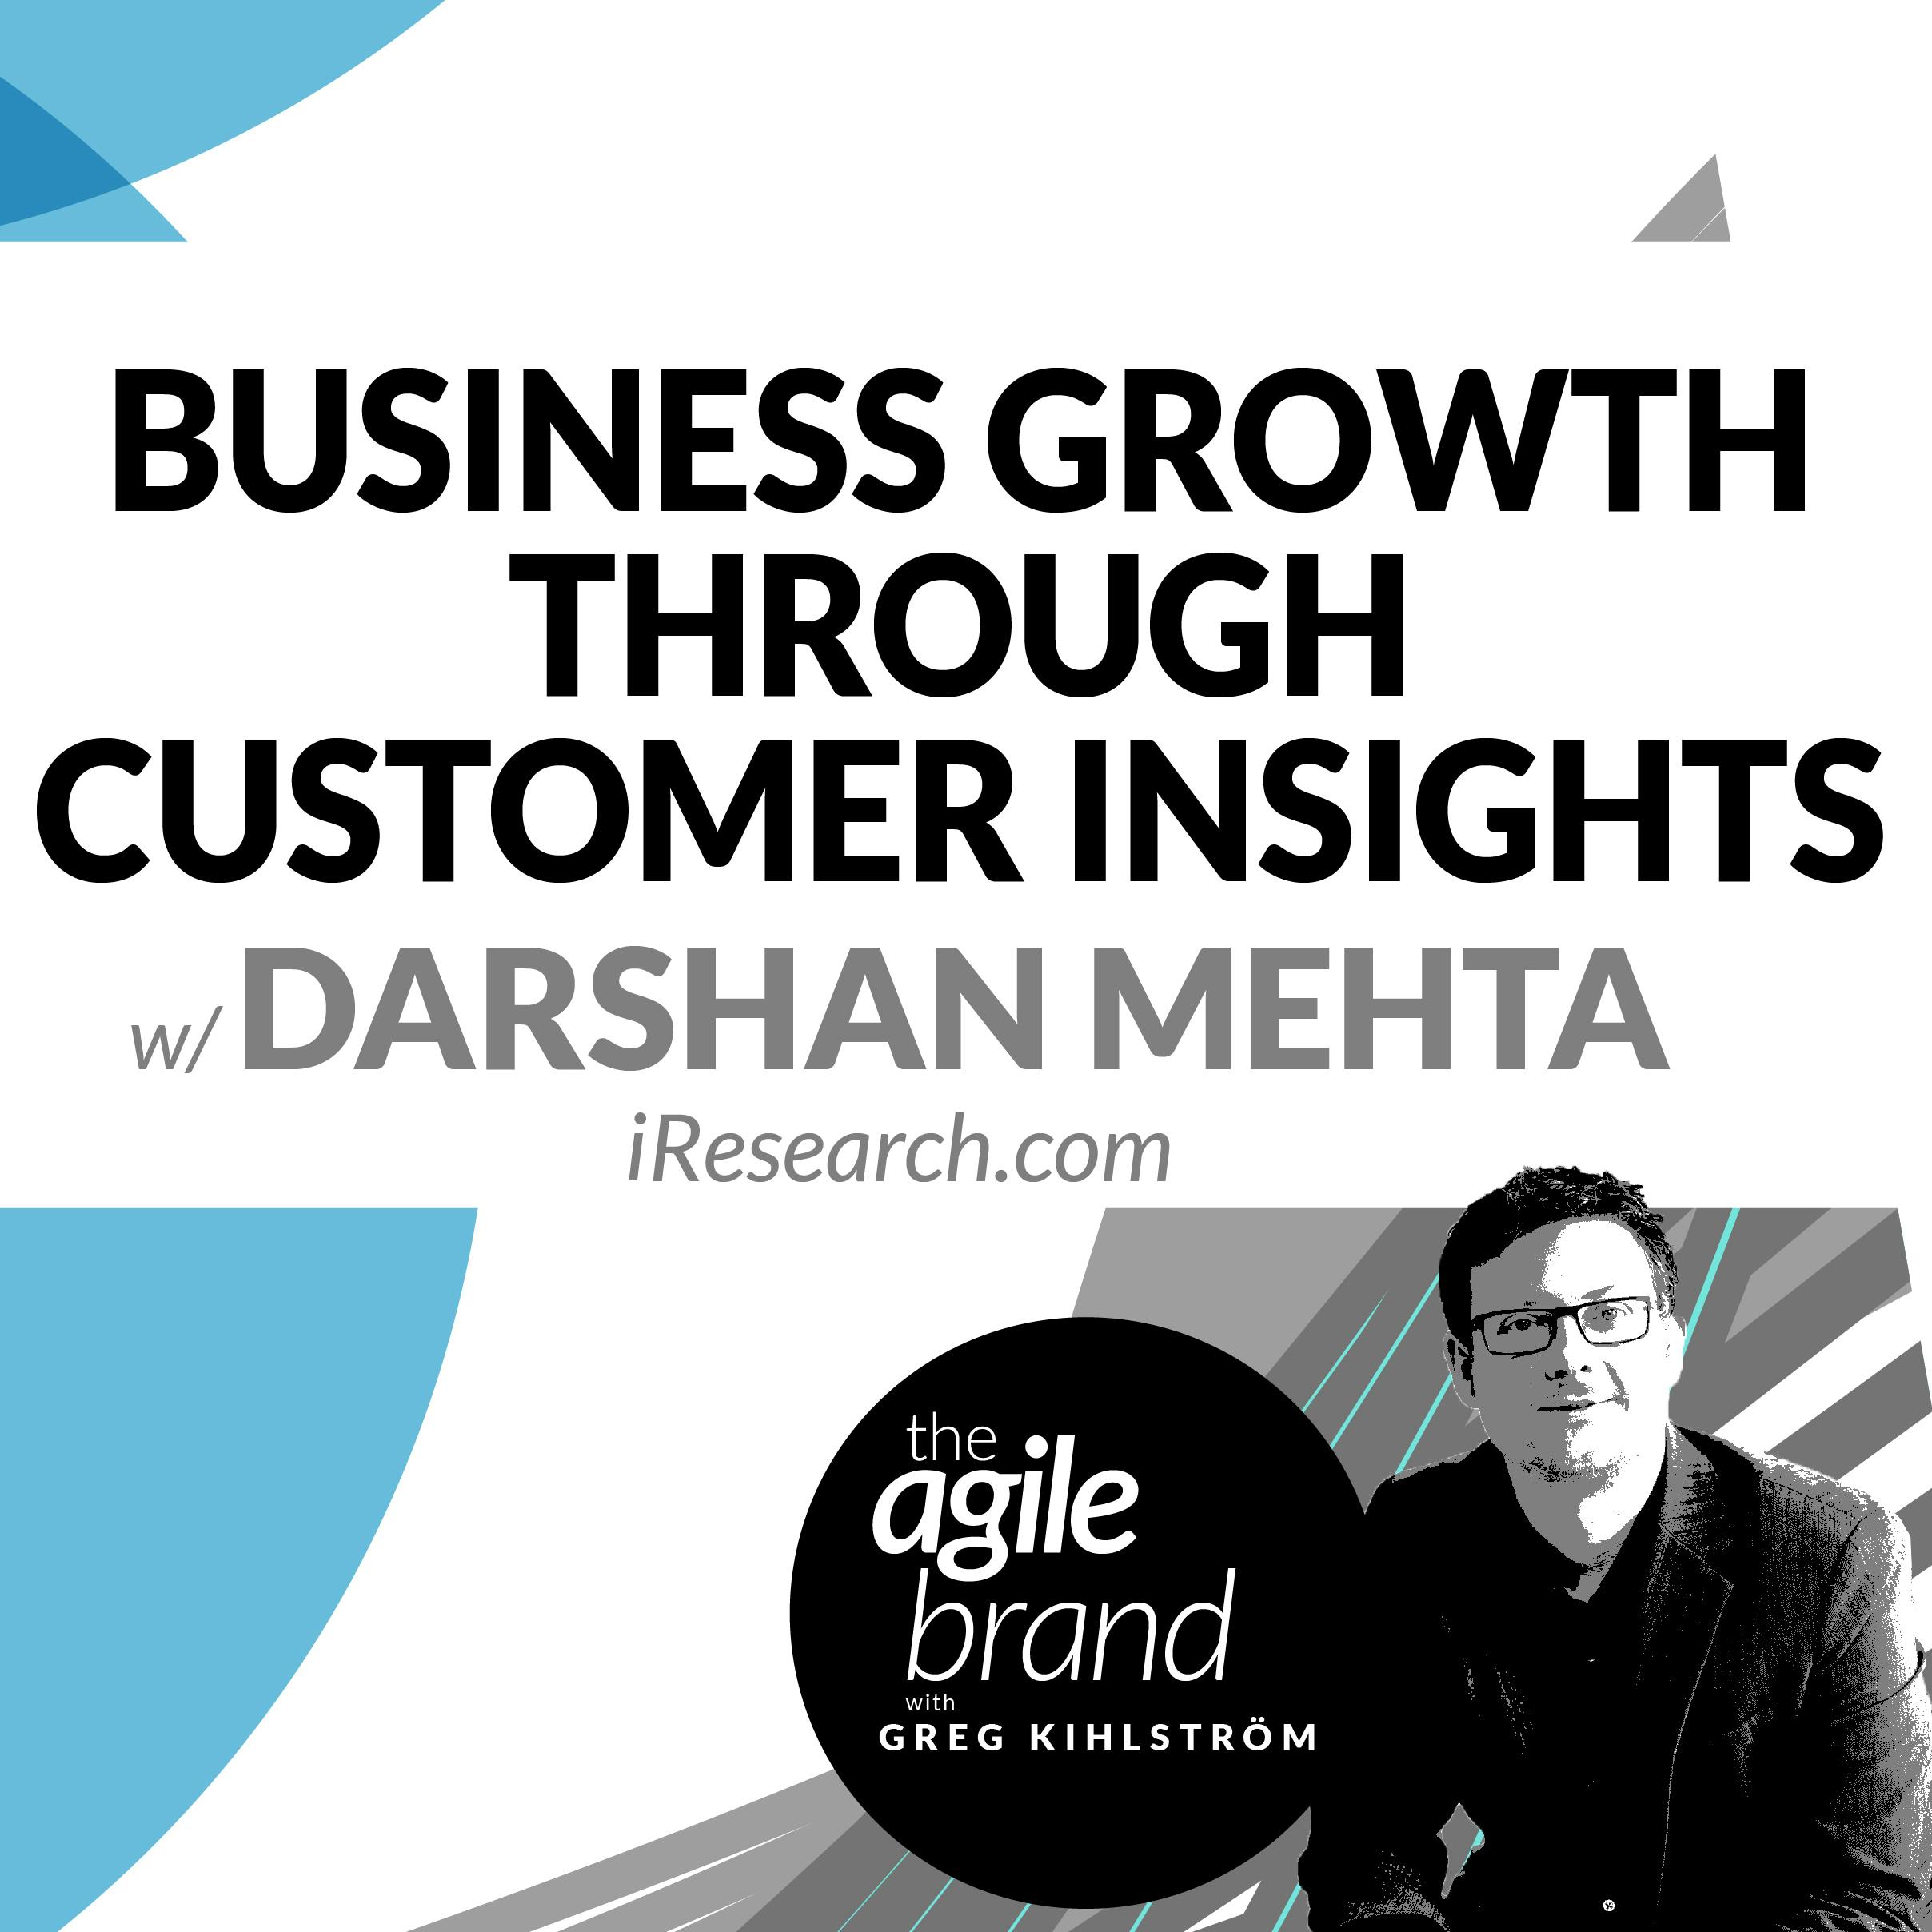 #229: Business Growth Through Customer Insights with Darshan Metha, iResearch.com